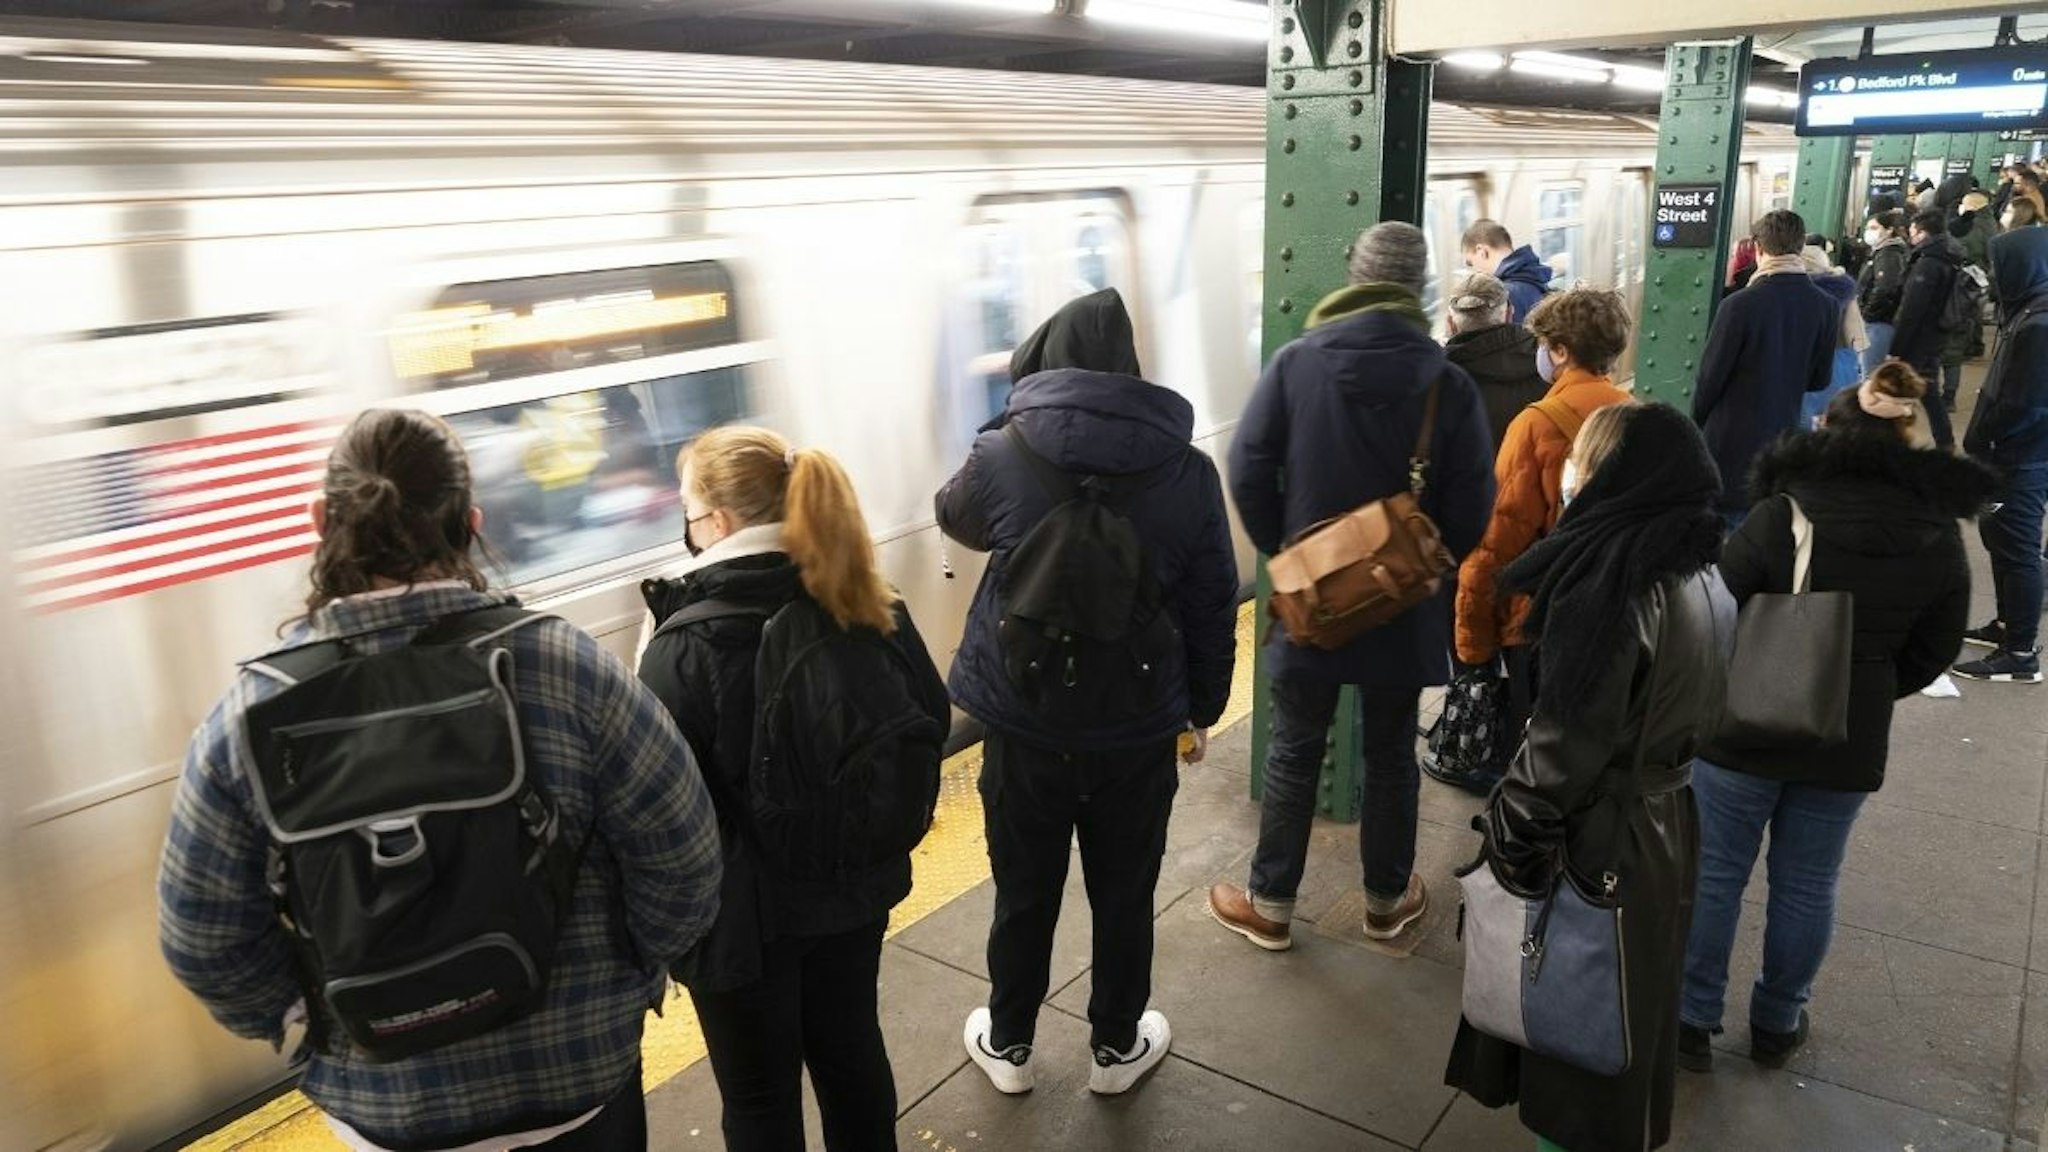 Commuters wait on the platform to board a subway at a station in New York, U.S., on Monday, March 28, 2022.